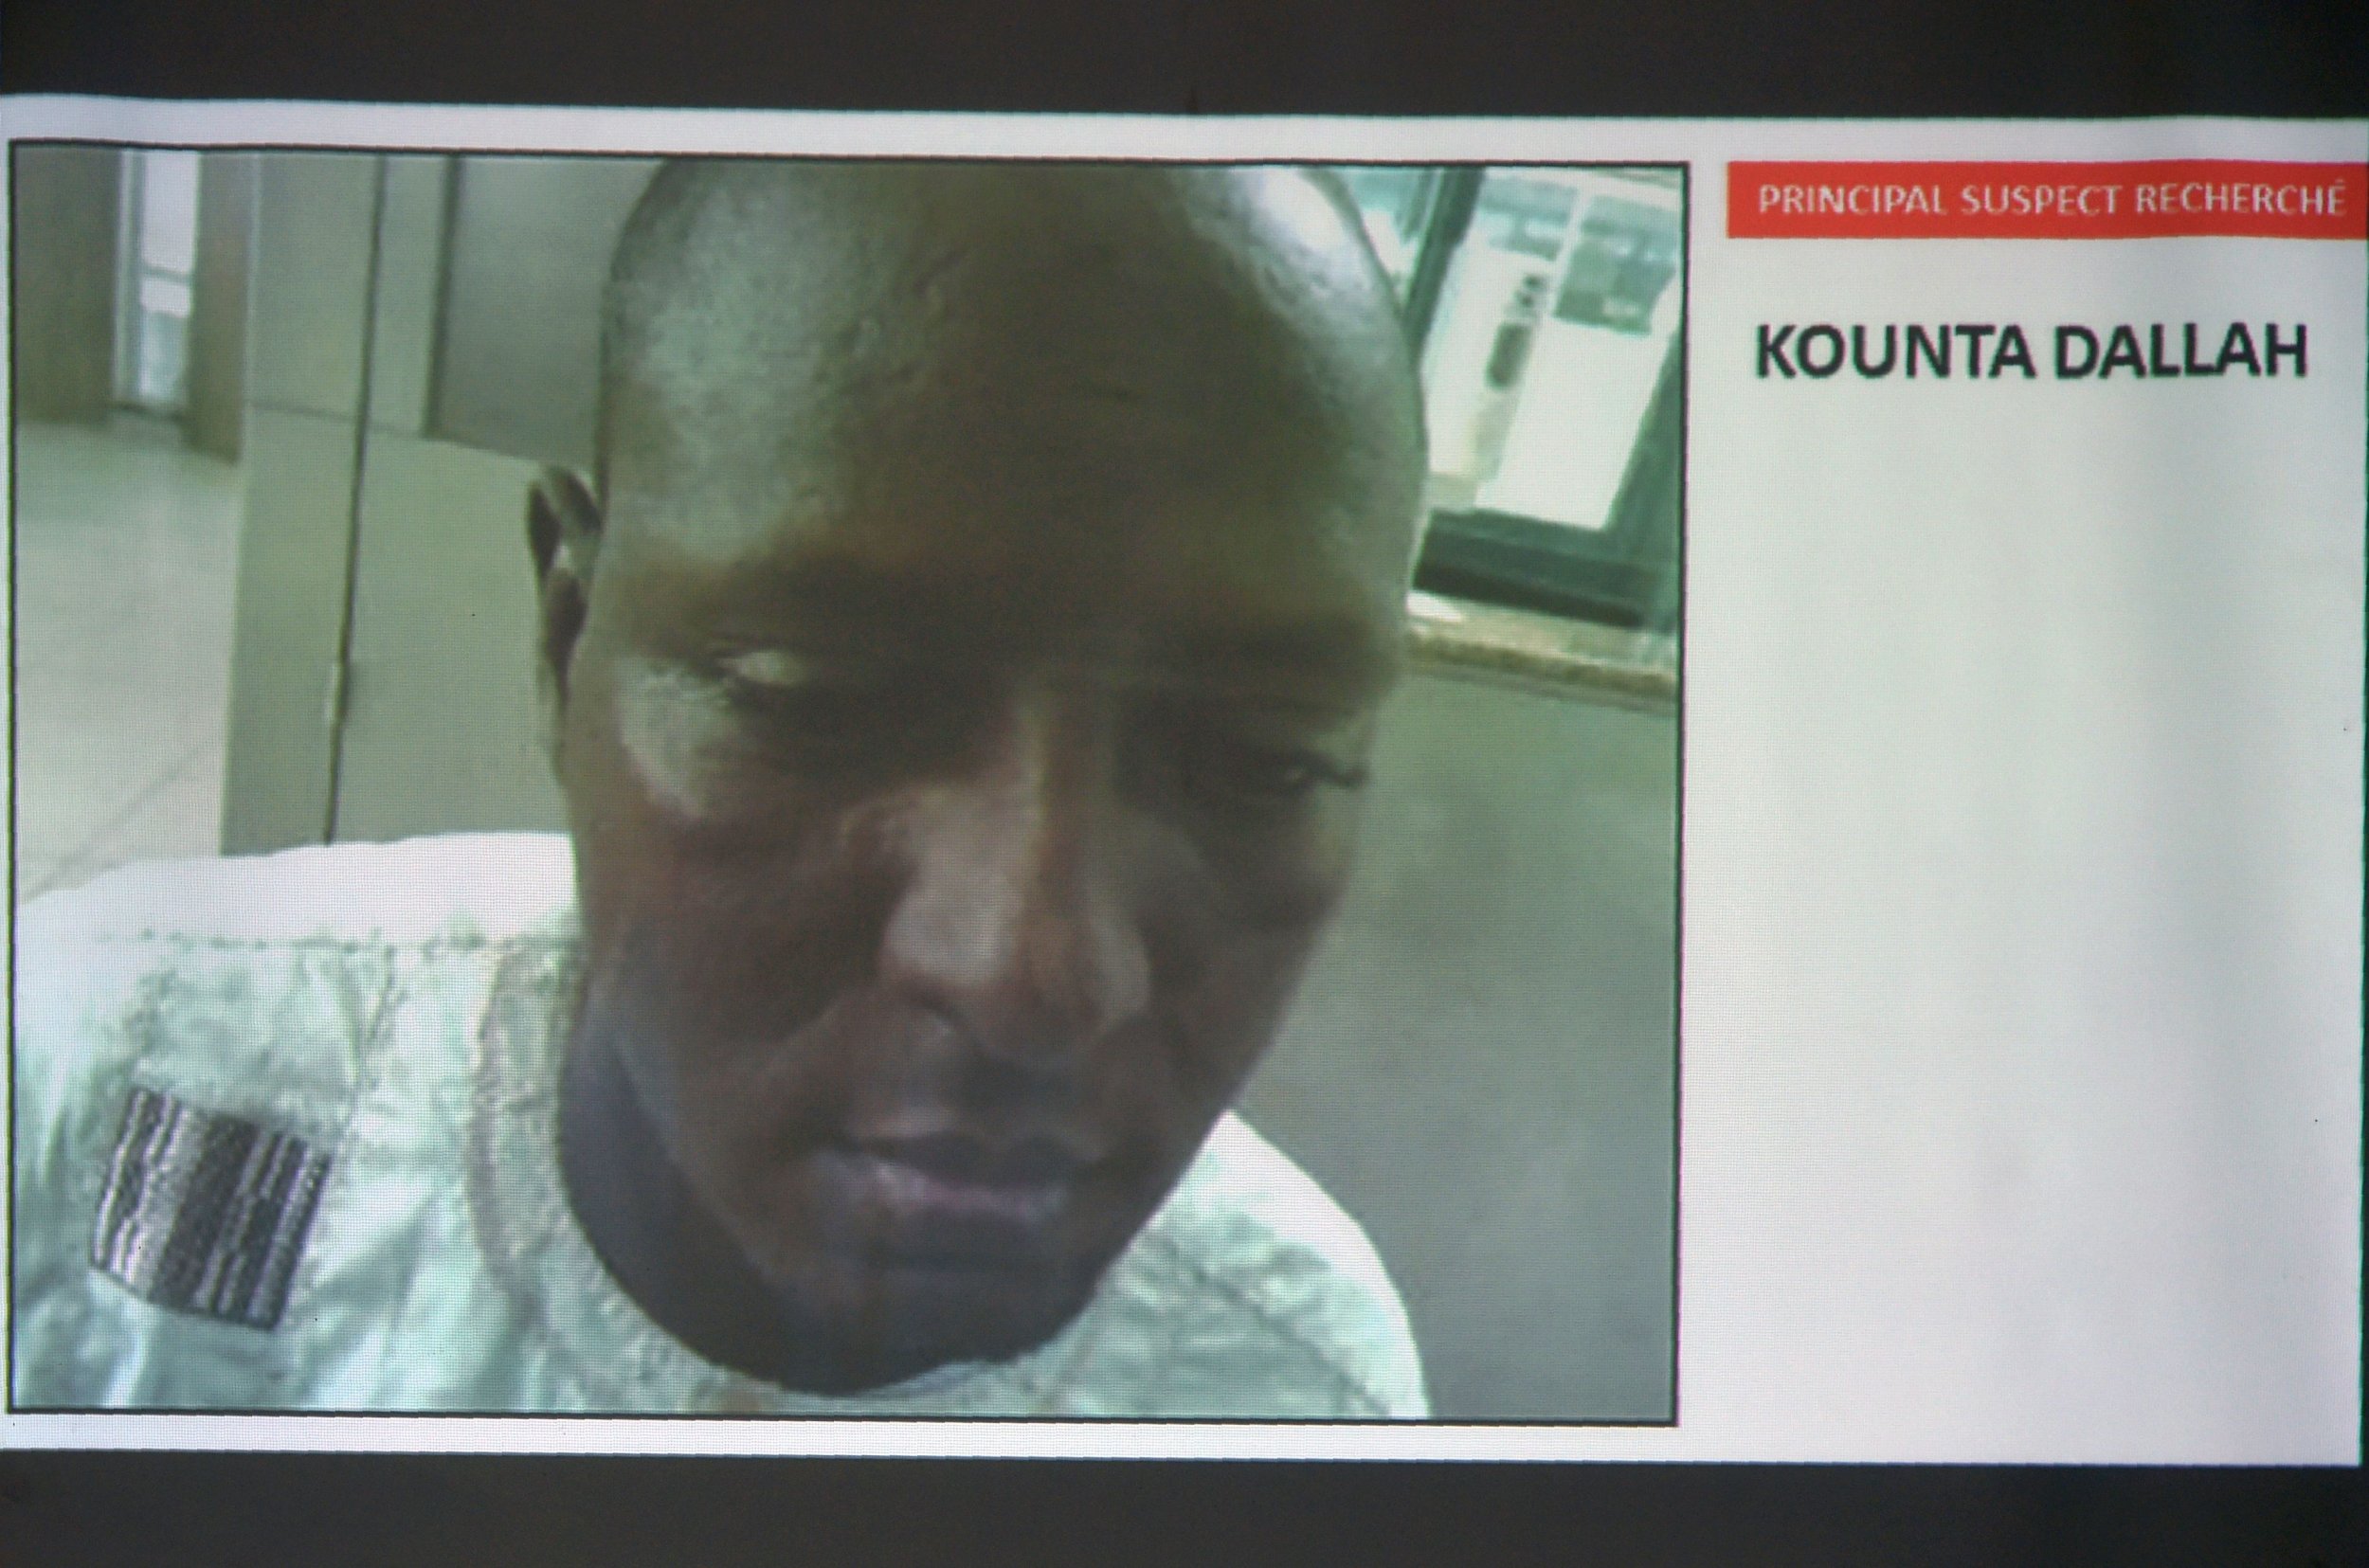 The prime suspect in the Ivory Coast attack, Kounta Dallah, is seen at a press conference in Abidjan.